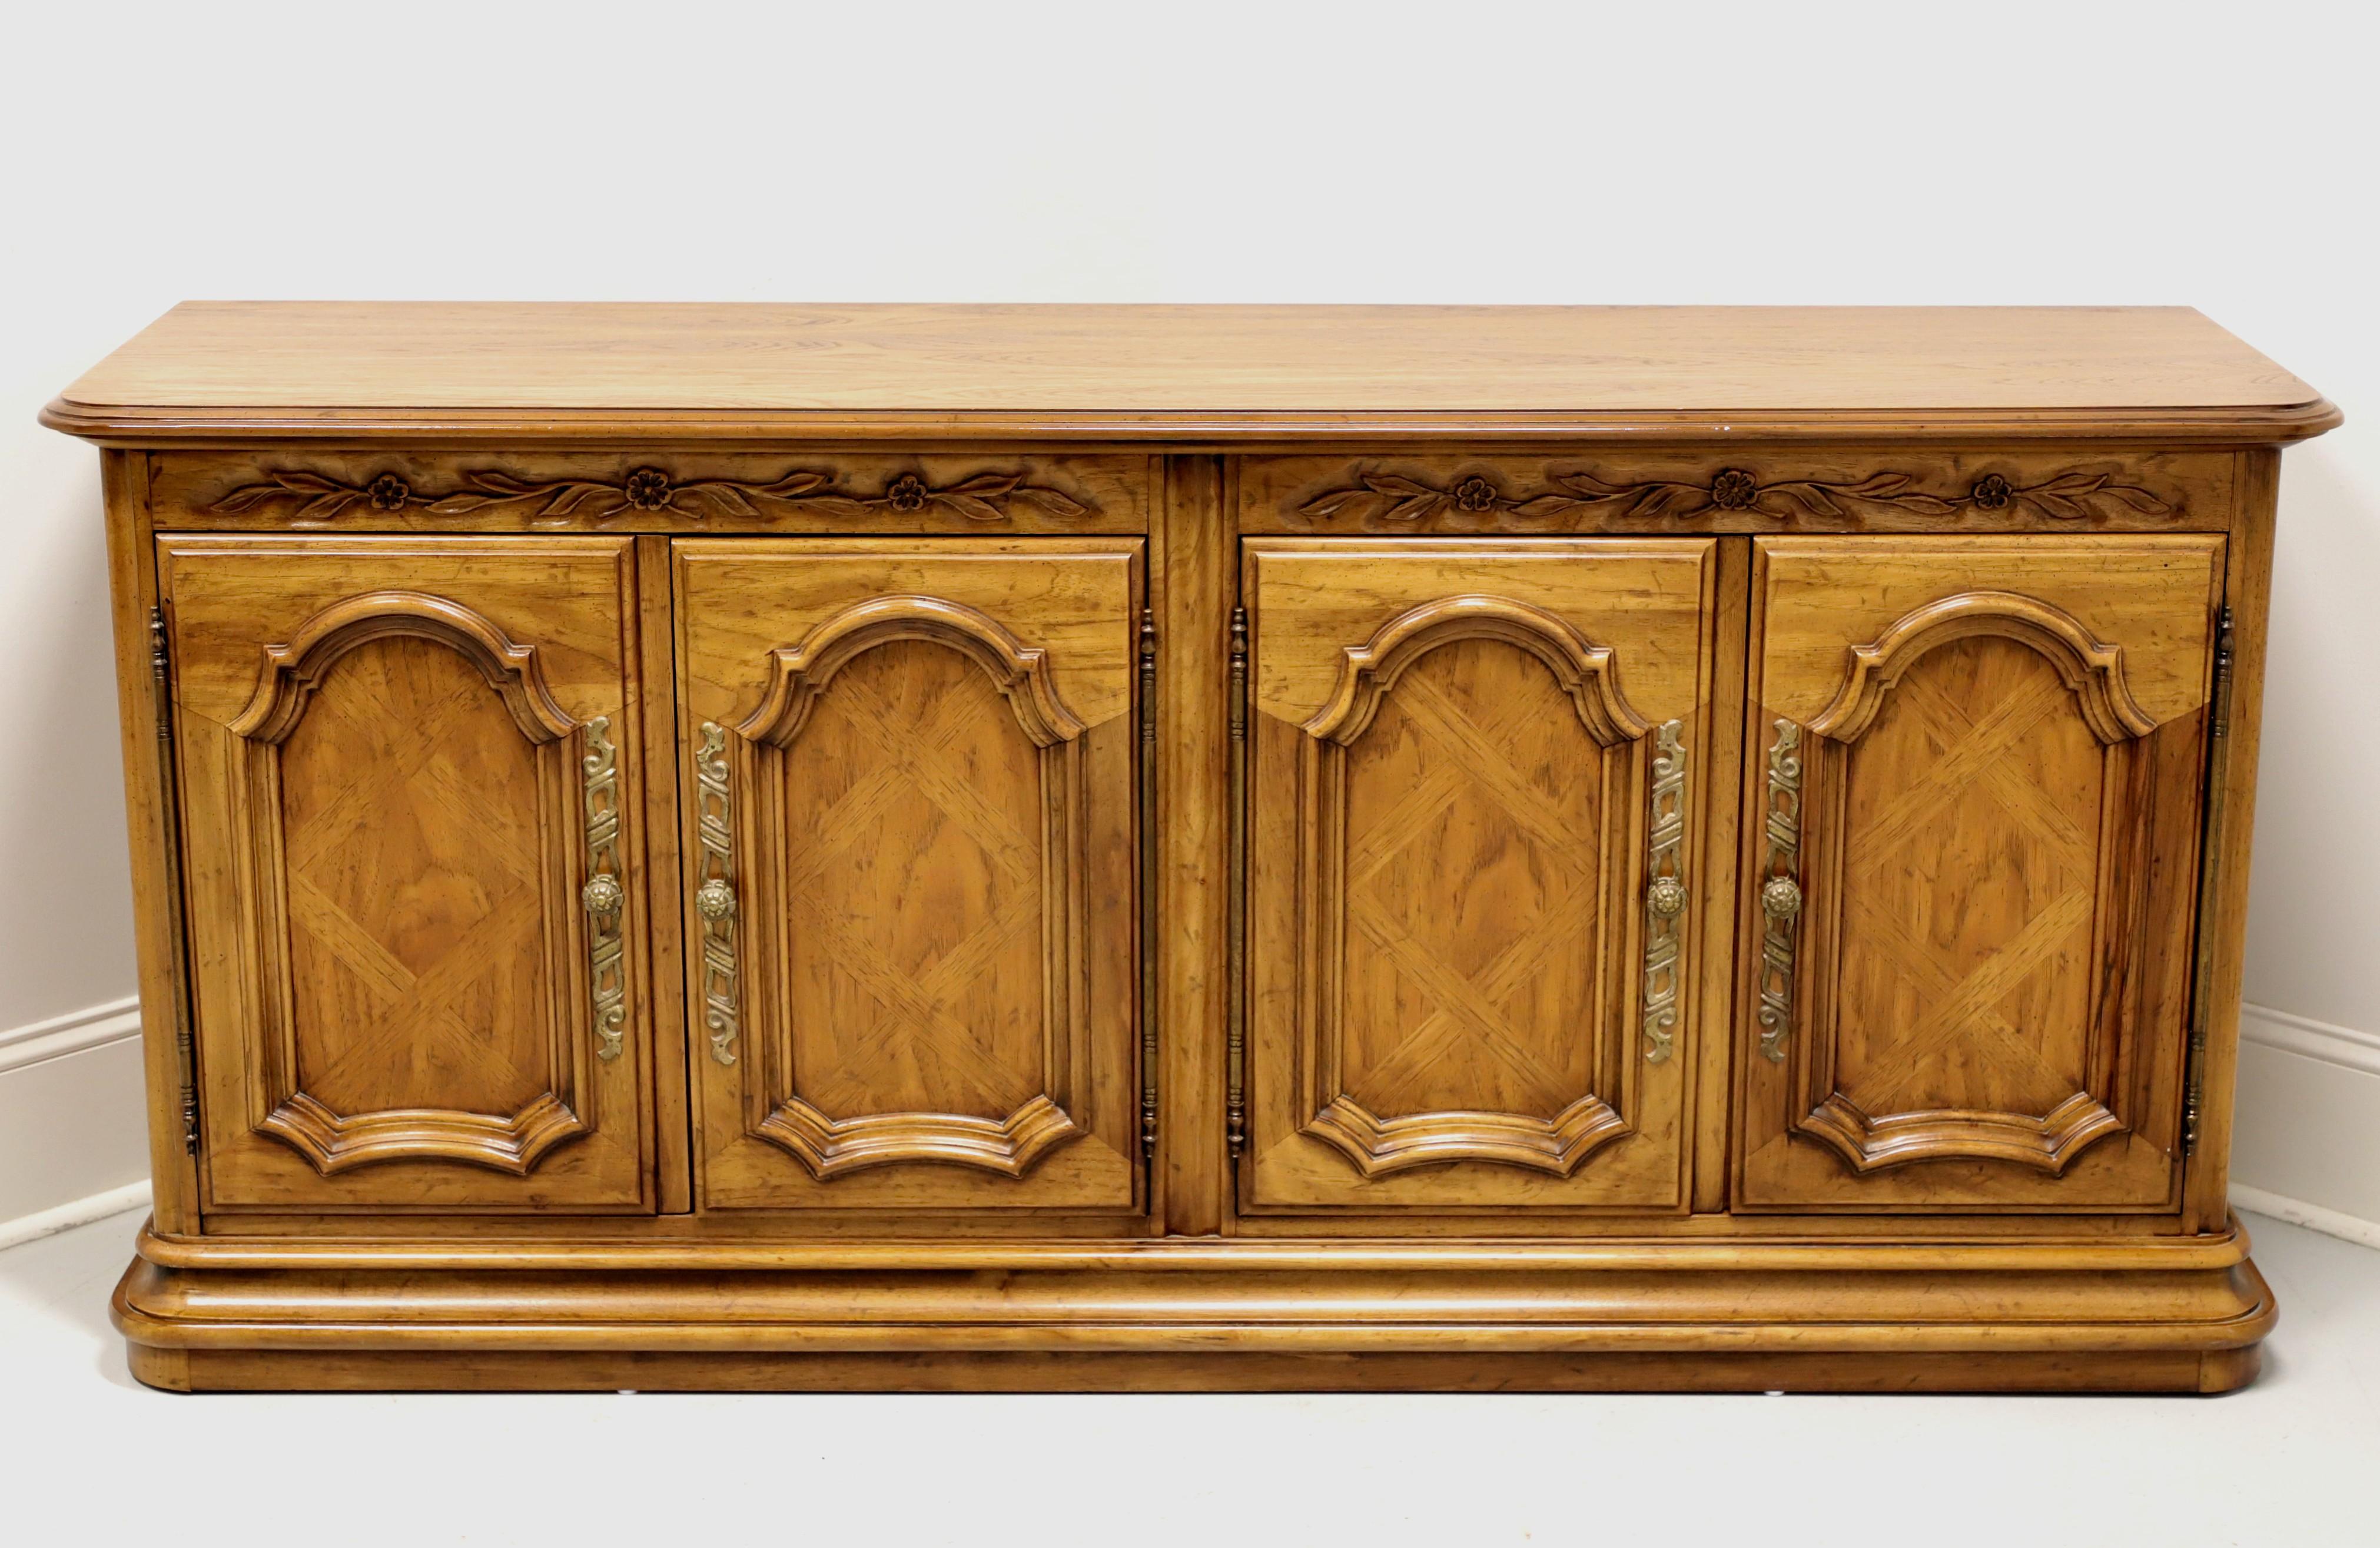 A French Country style credenza by Drexel, from their Cabernet Collection. Solid pecan with parquetry to door fronts and brass hardware. Features four raised panel doors revealing to right side a storage area with one fixed wood shelf and to left